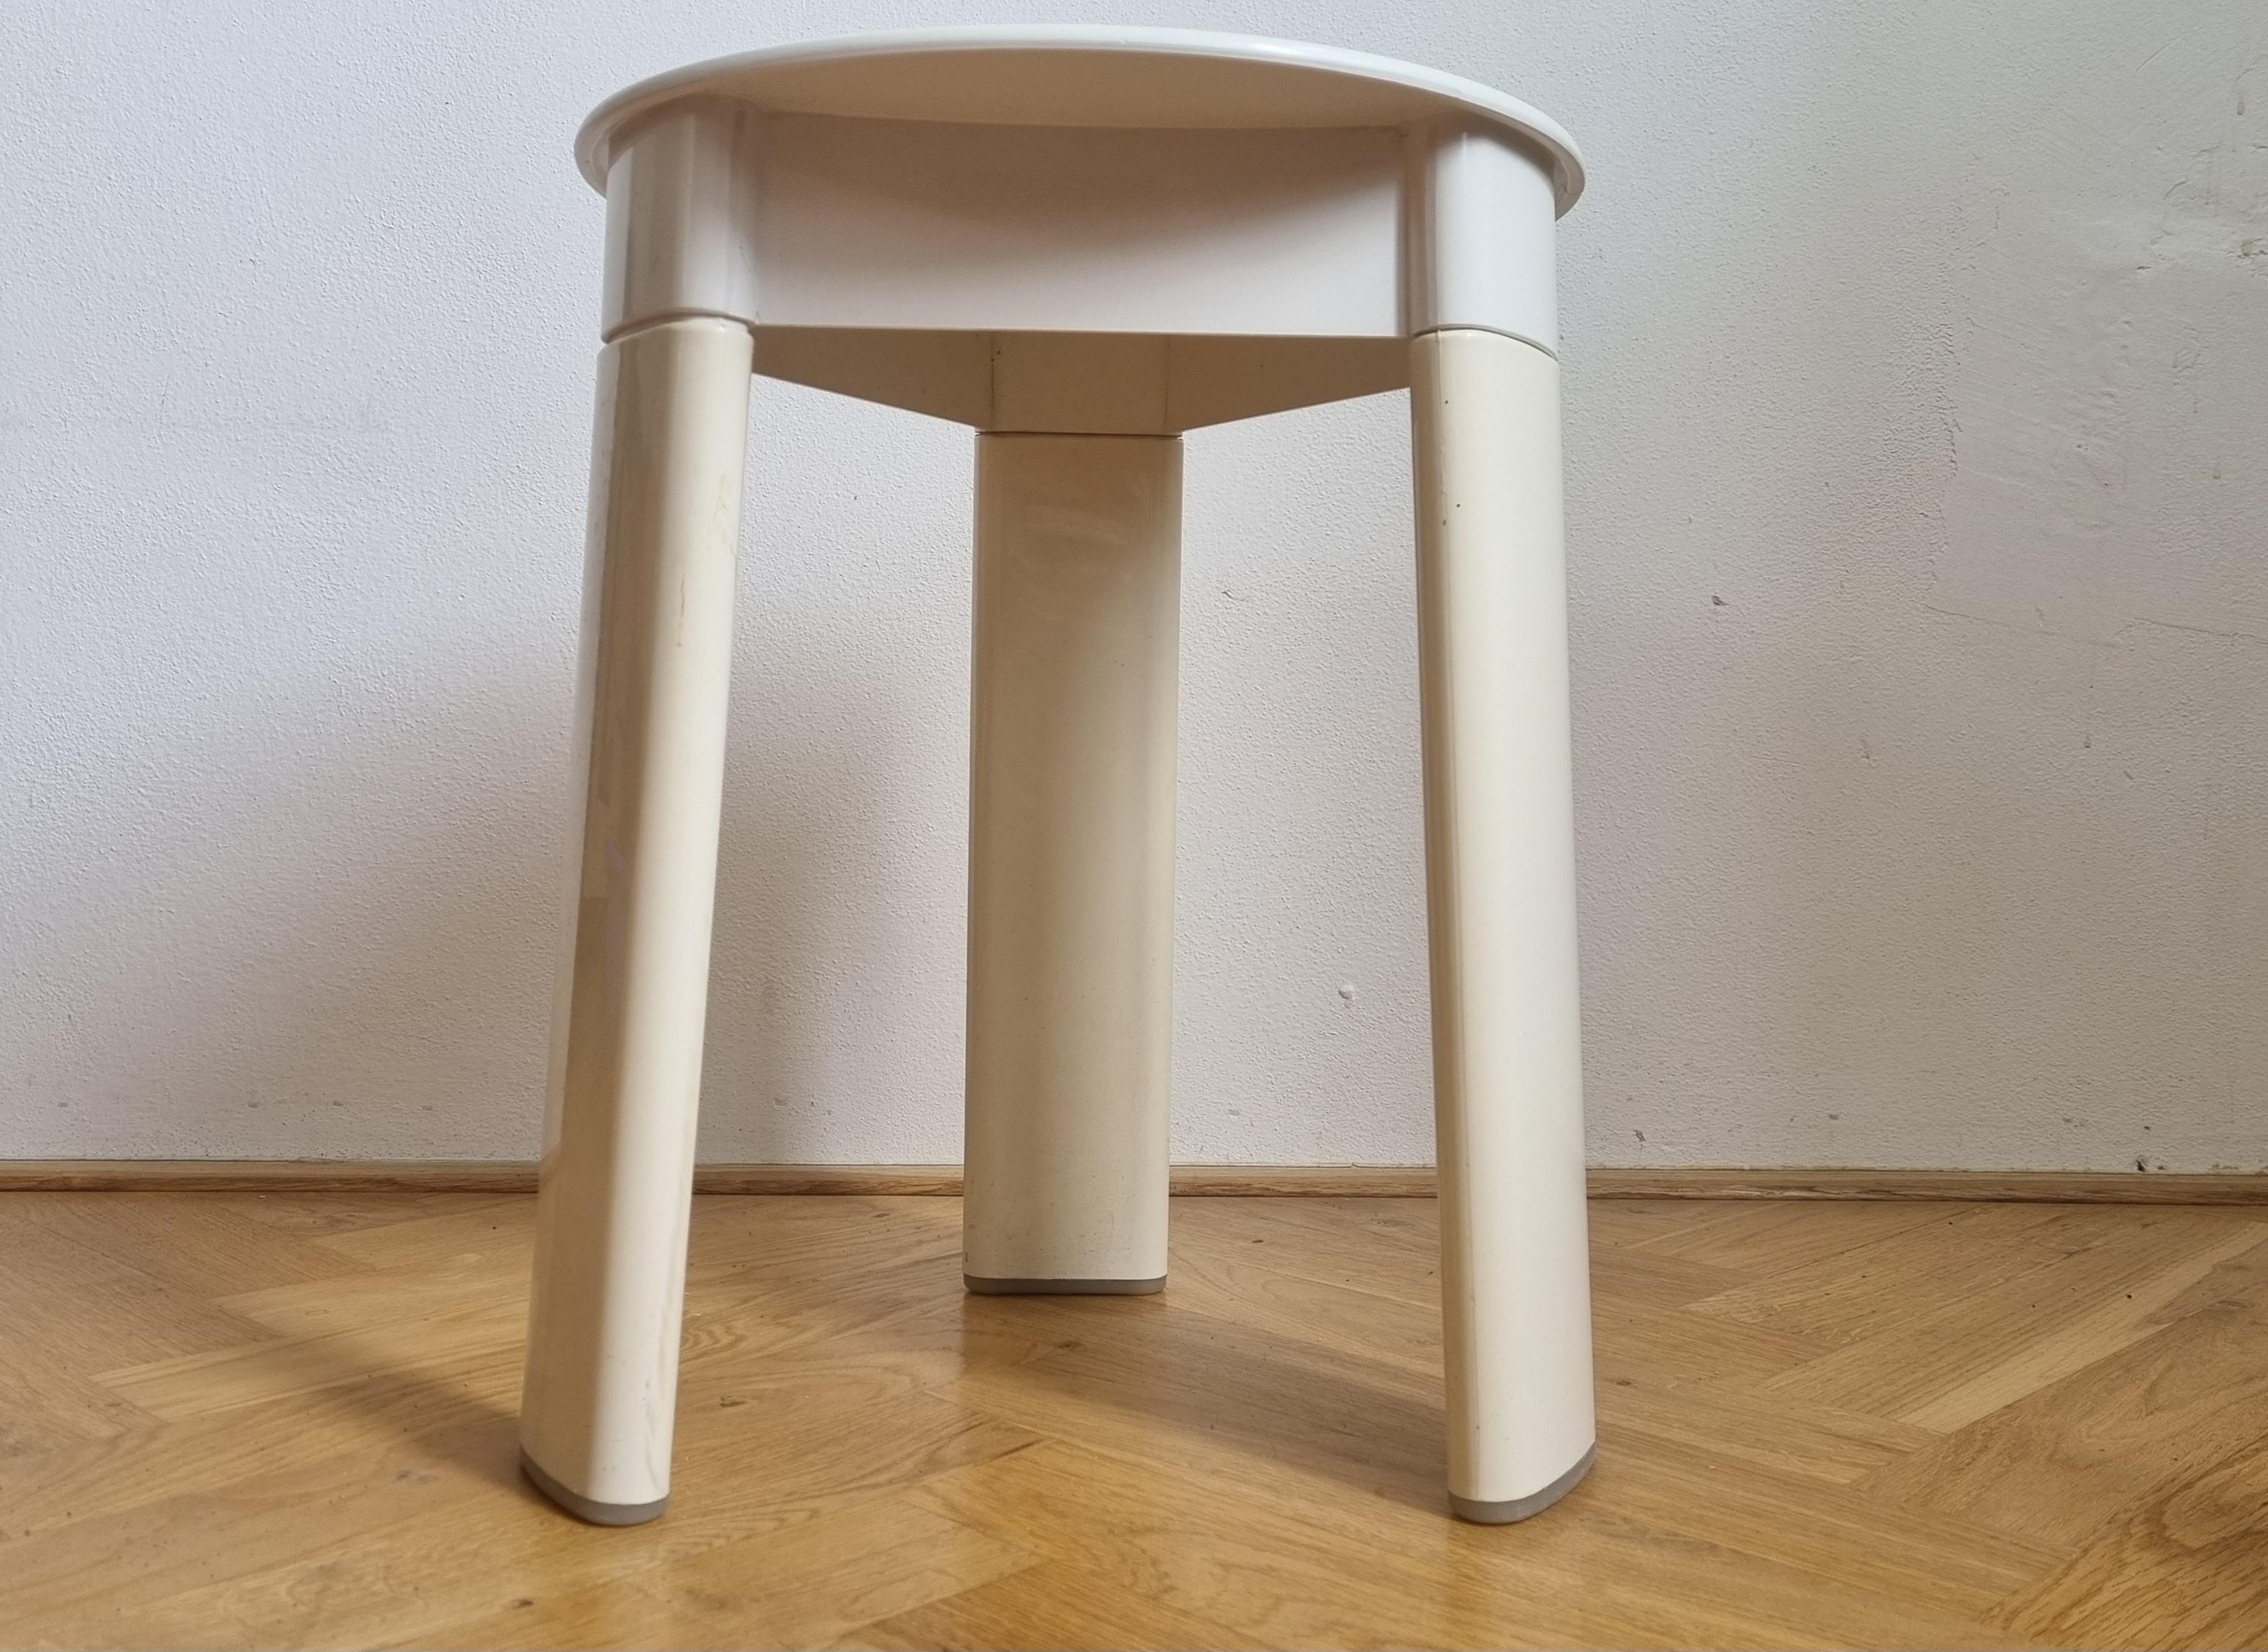 Midcentury Stool or Side Table Trio, Olaf Von Bohr for Gedy, Italy, 1970s For Sale 5